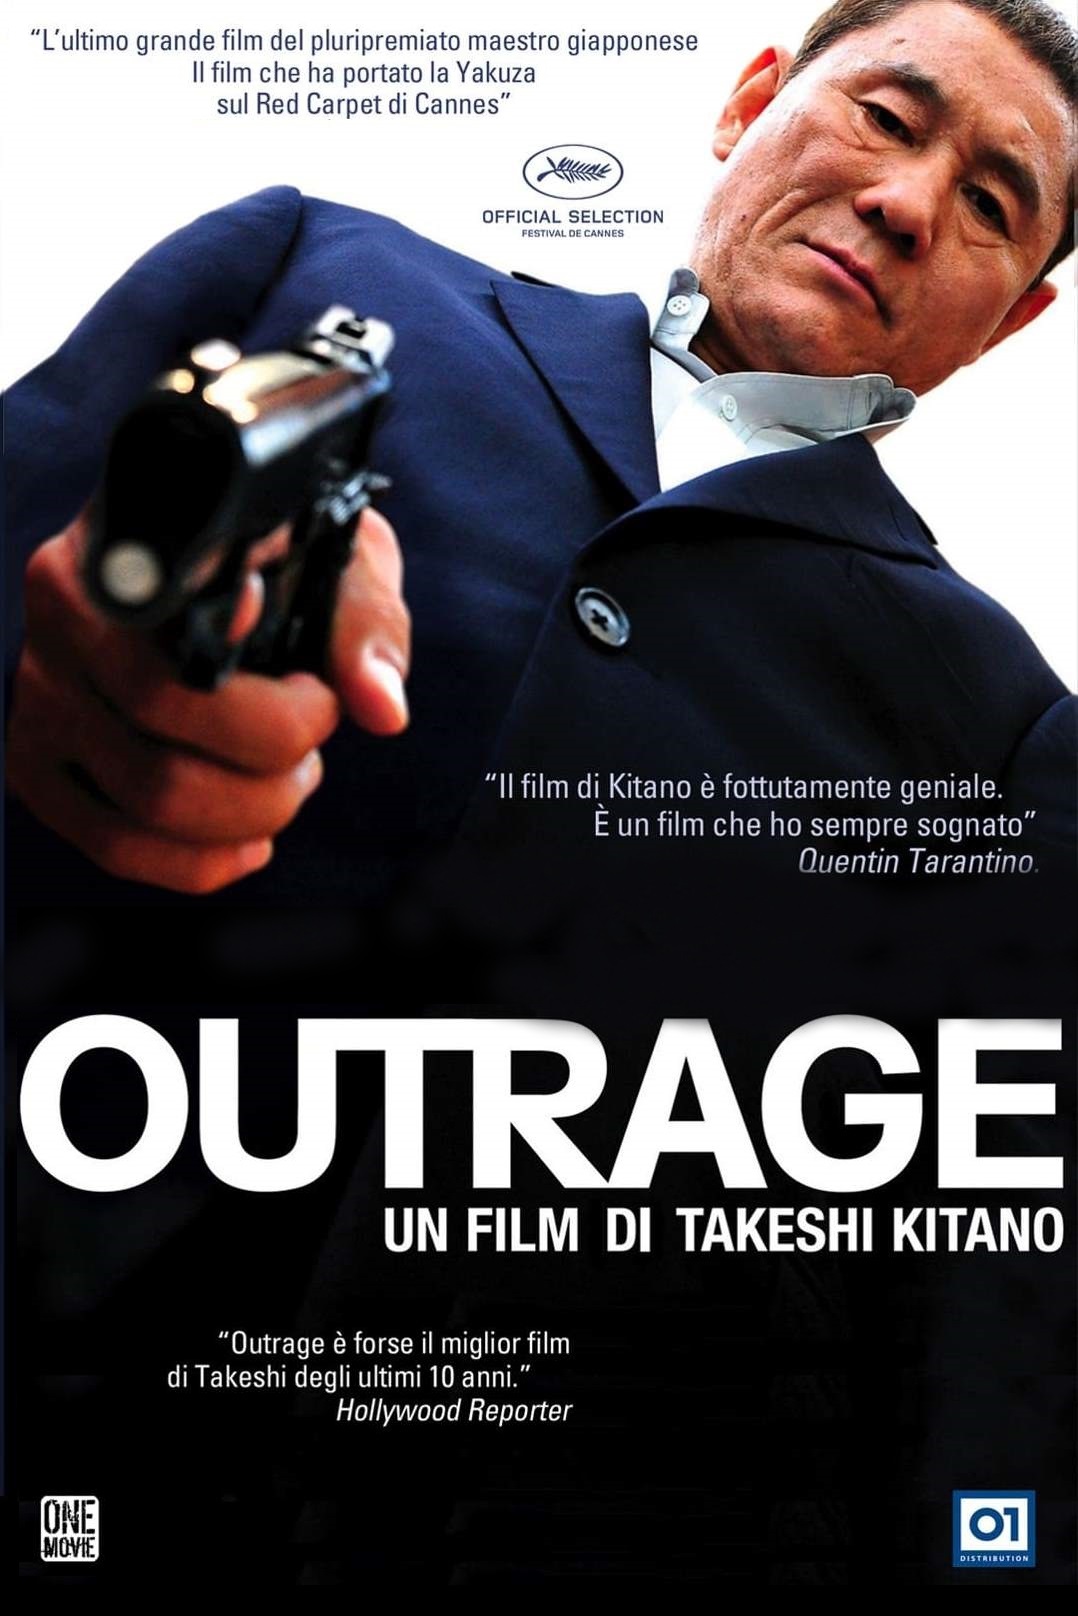 Outrage [HD] (2010)